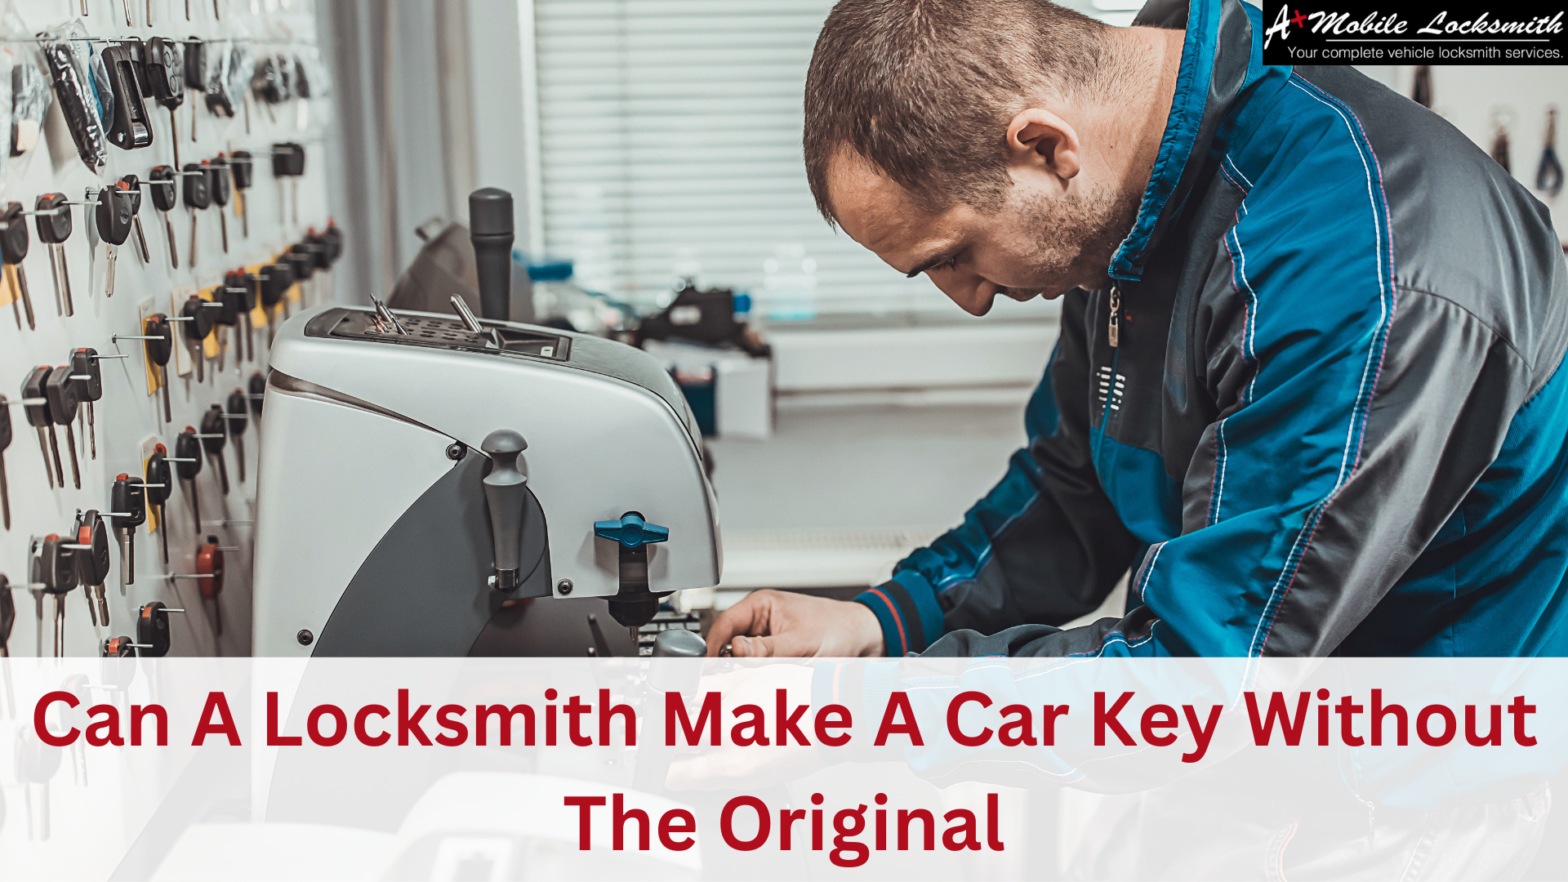 Can a locksmith make a car key without the original